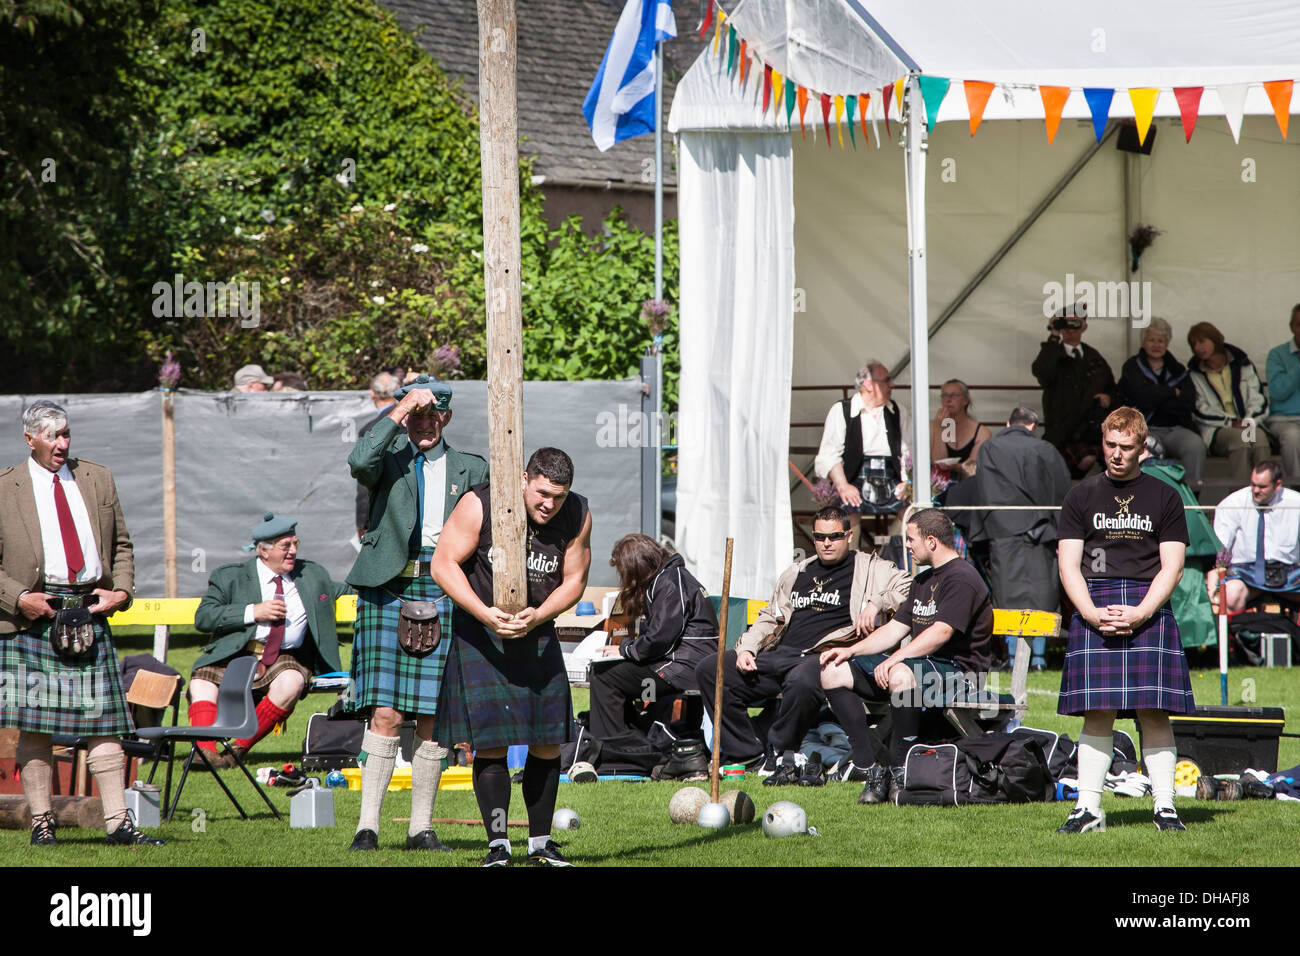 Caber tossing at the Lonach highland games in Aberdeenshire,Scotland Stock Photo